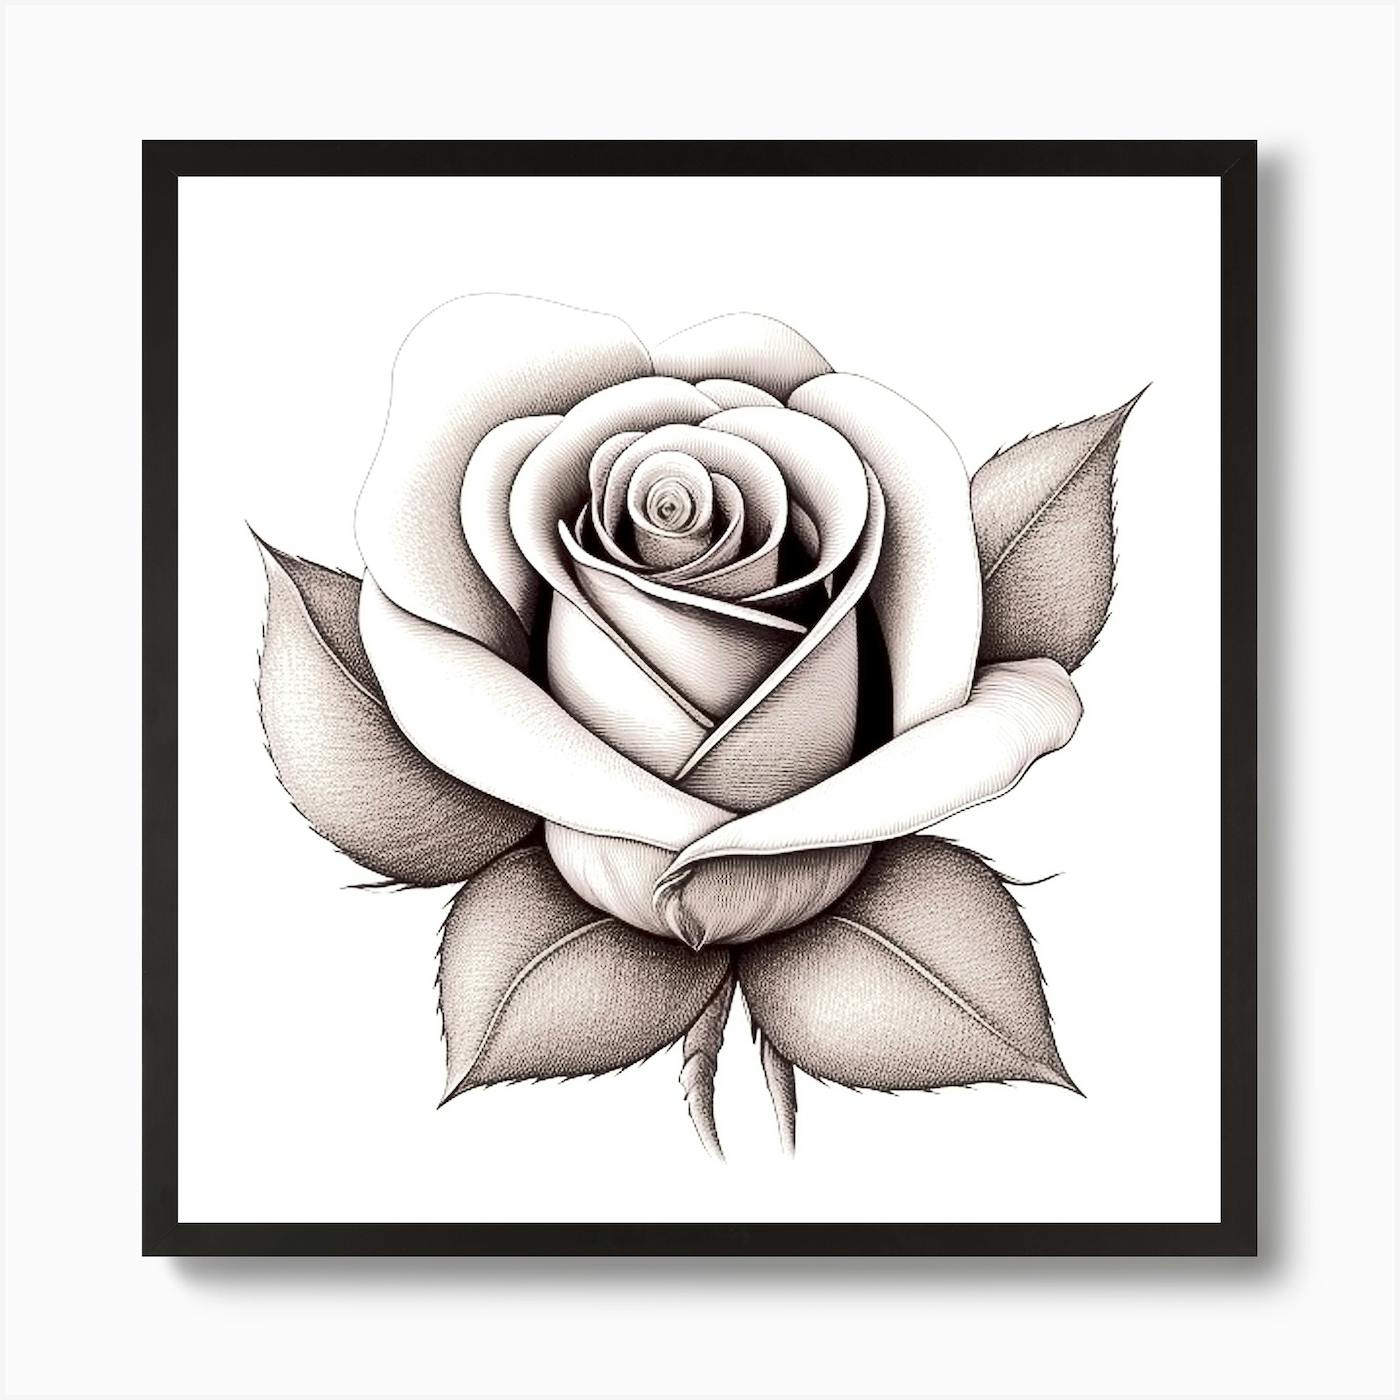 Rose Tattoo Cliparts, Stock Vector and Royalty Free Rose Tattoo  Illustrations